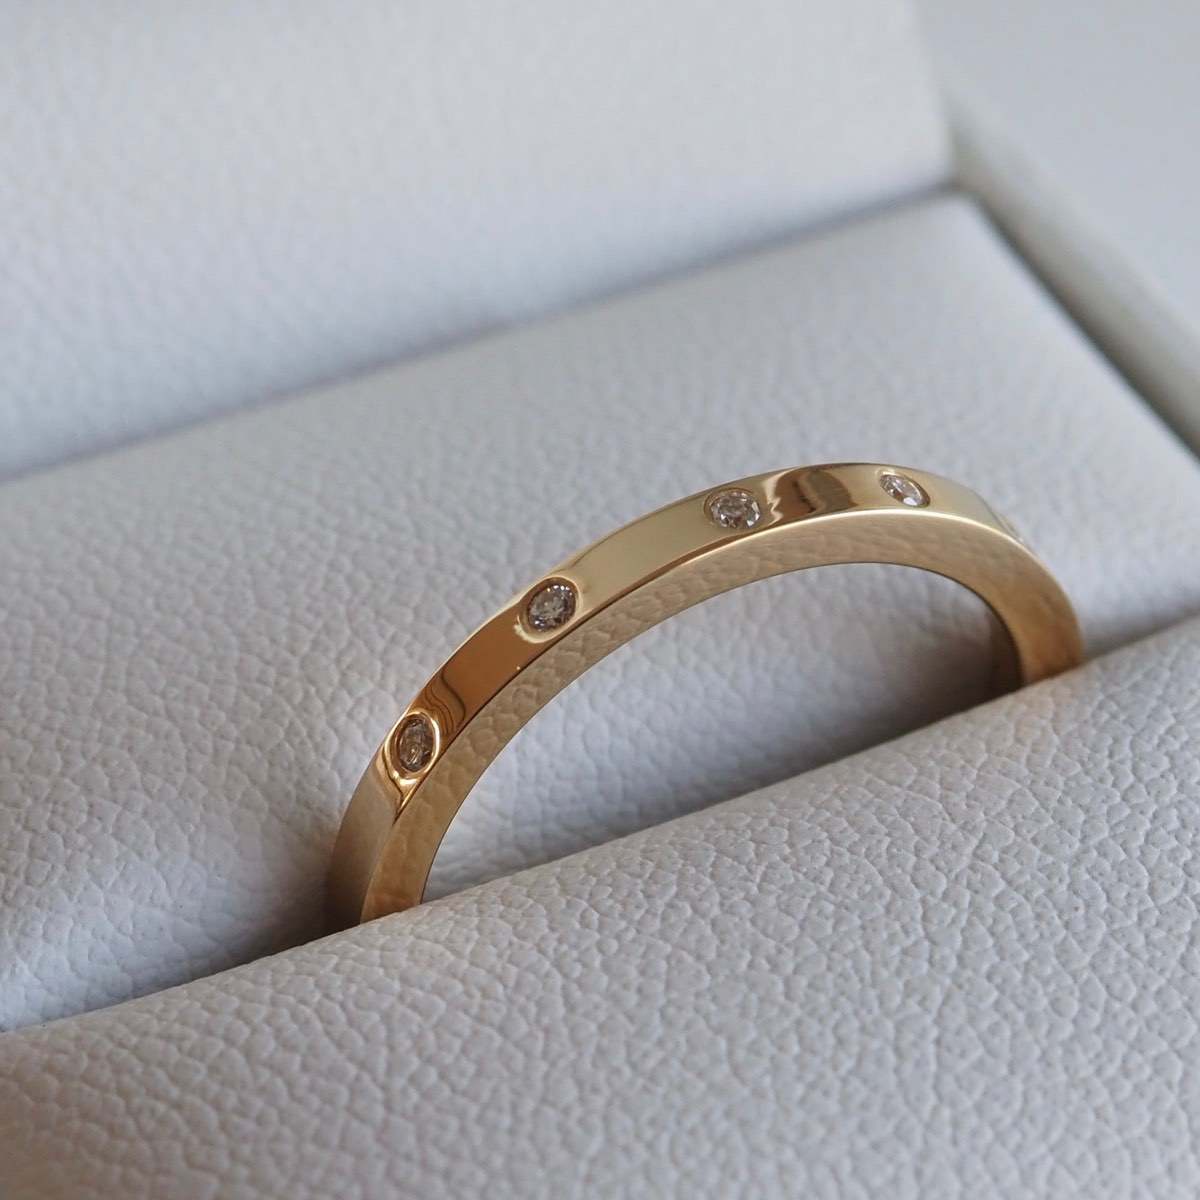 Four perfectly set flush stones on a beautifully weighted solid silver or gold band. 